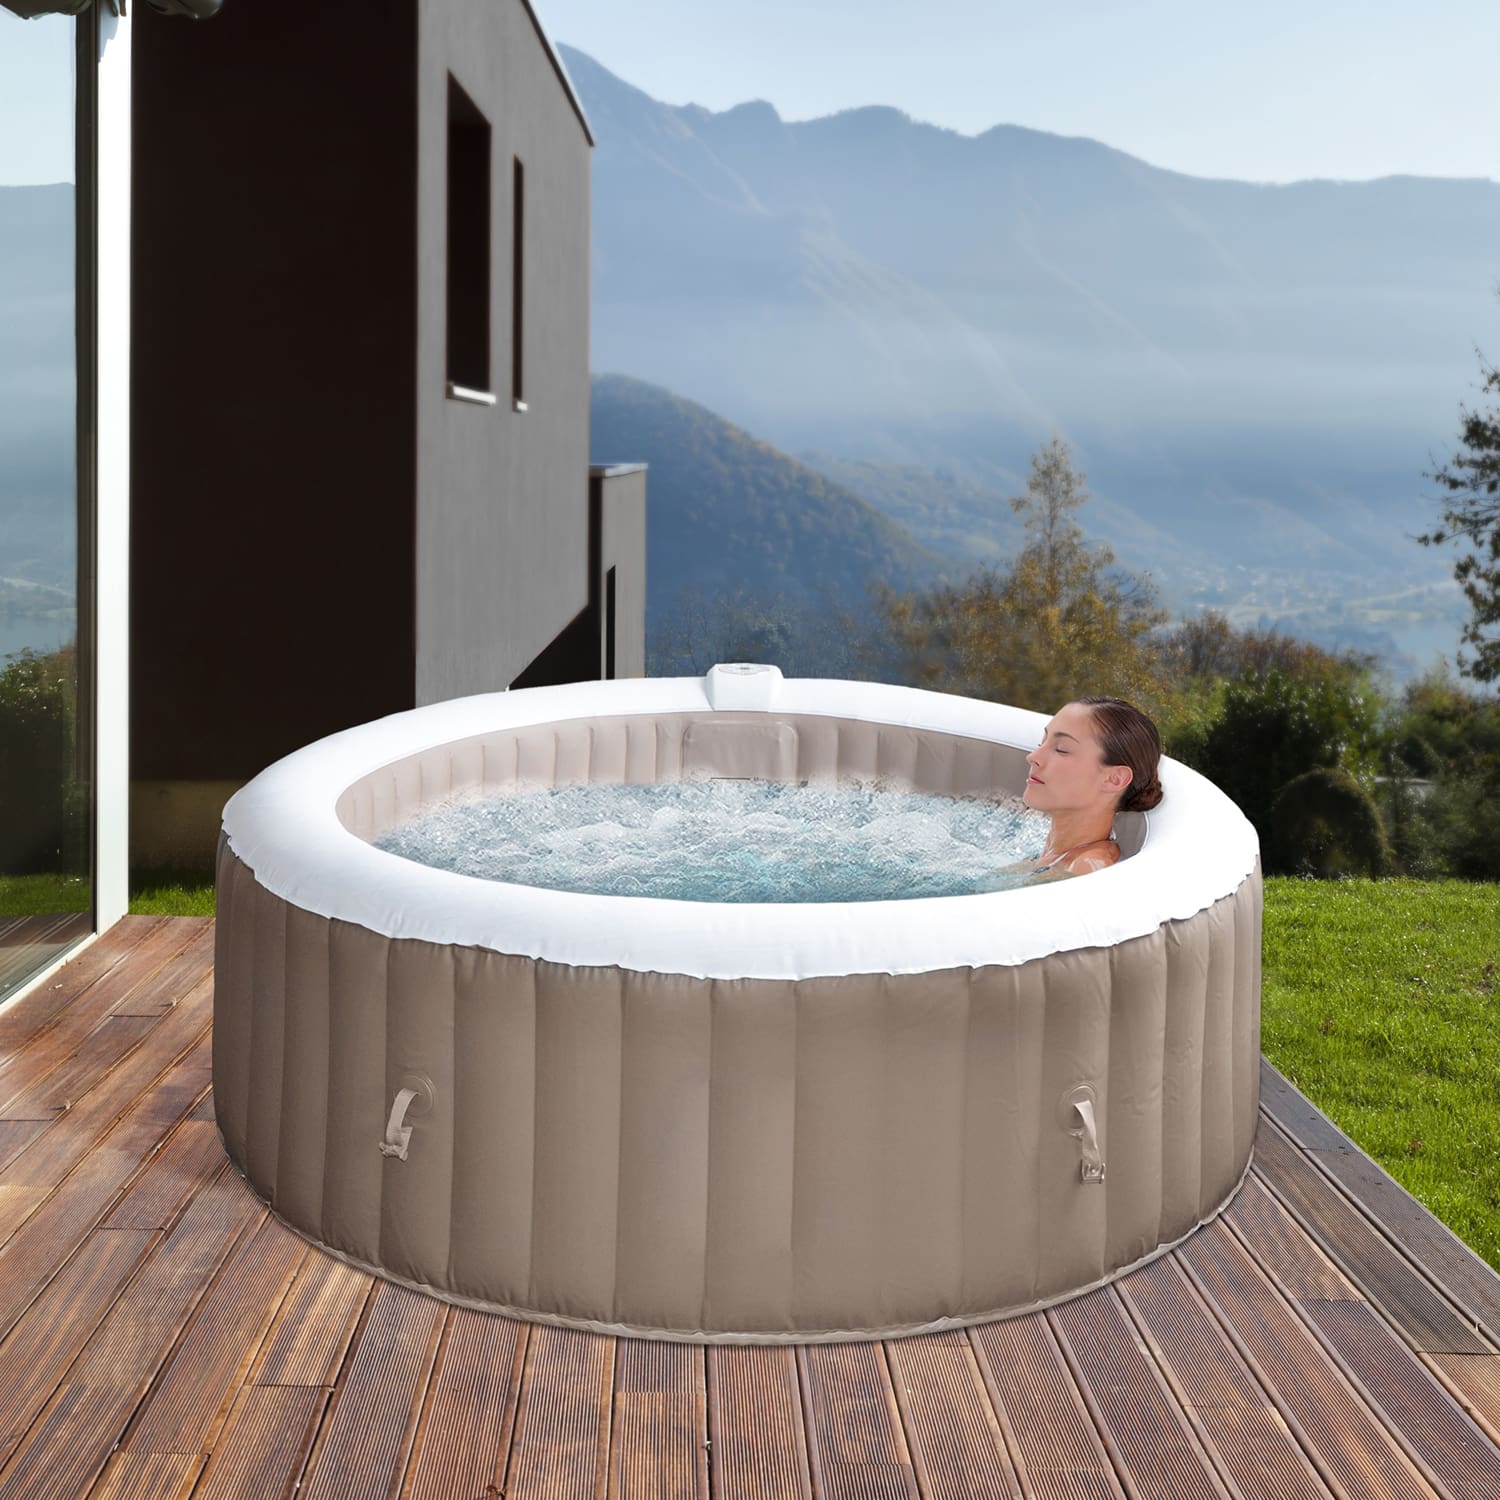 Inflatable hot tubs are known for their relatively easy maintenance compared to traditional